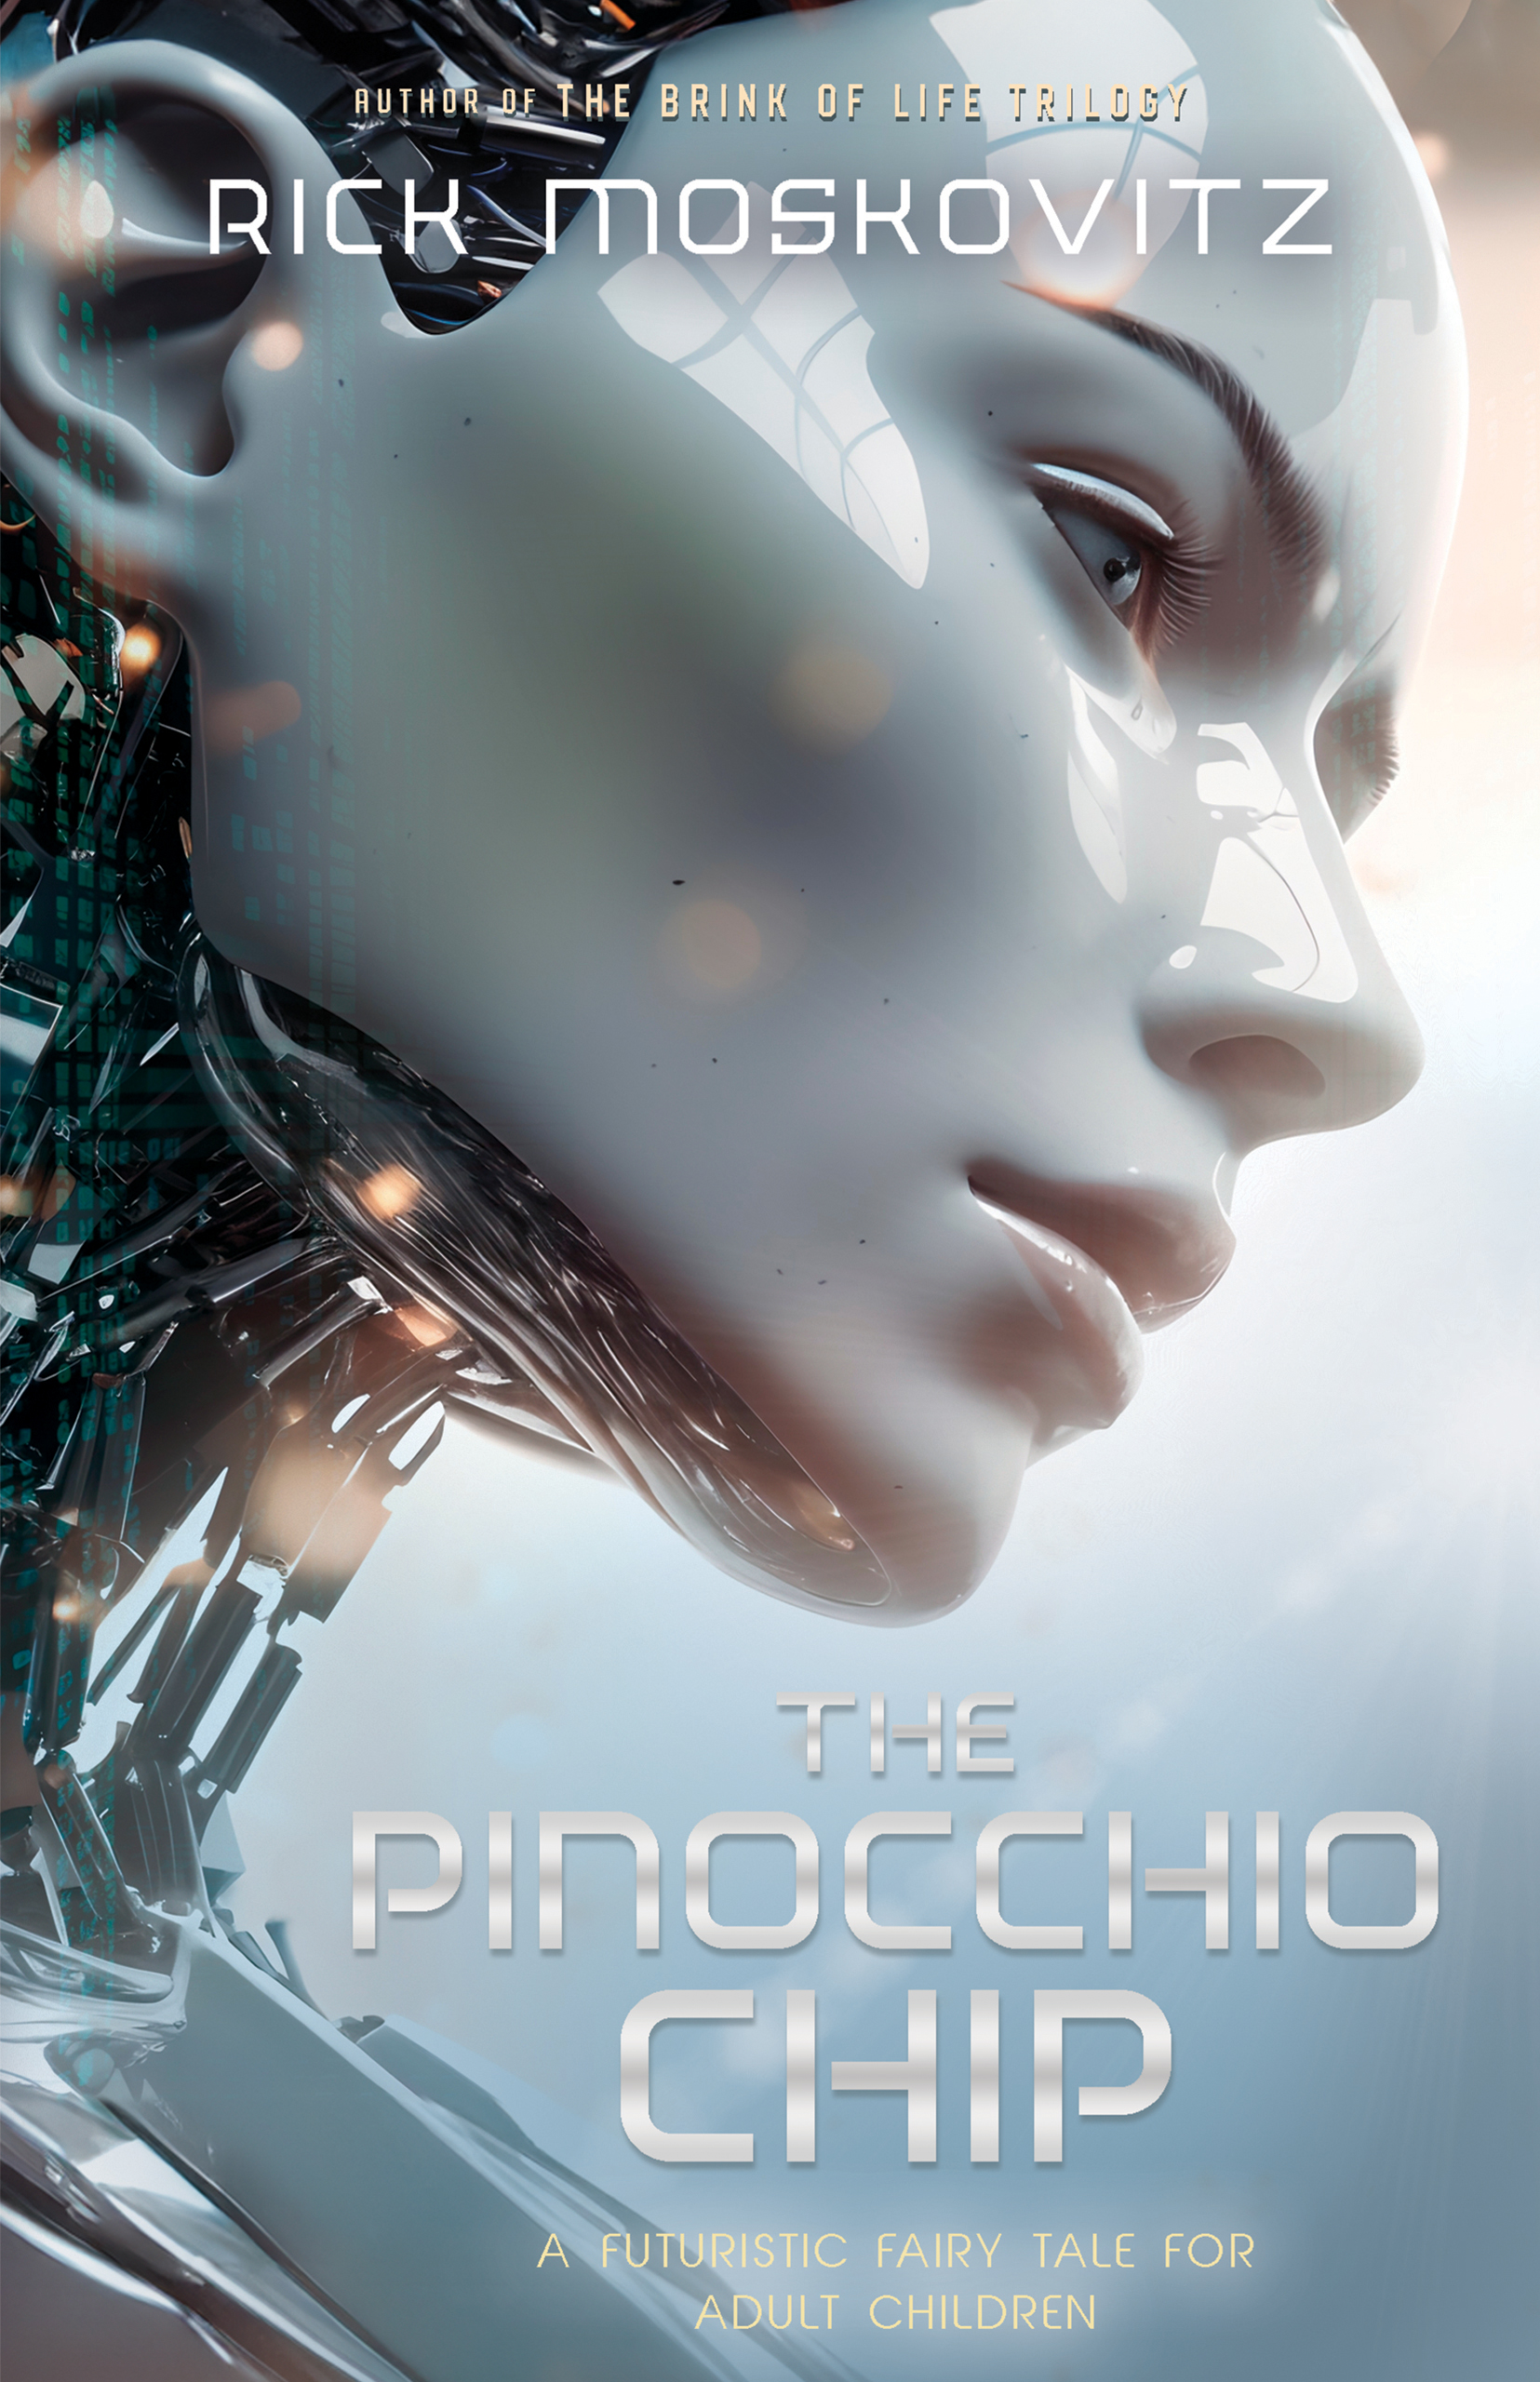 Part 5: Interview With Rick Moskovitz, Author of The Pinocchio Chip